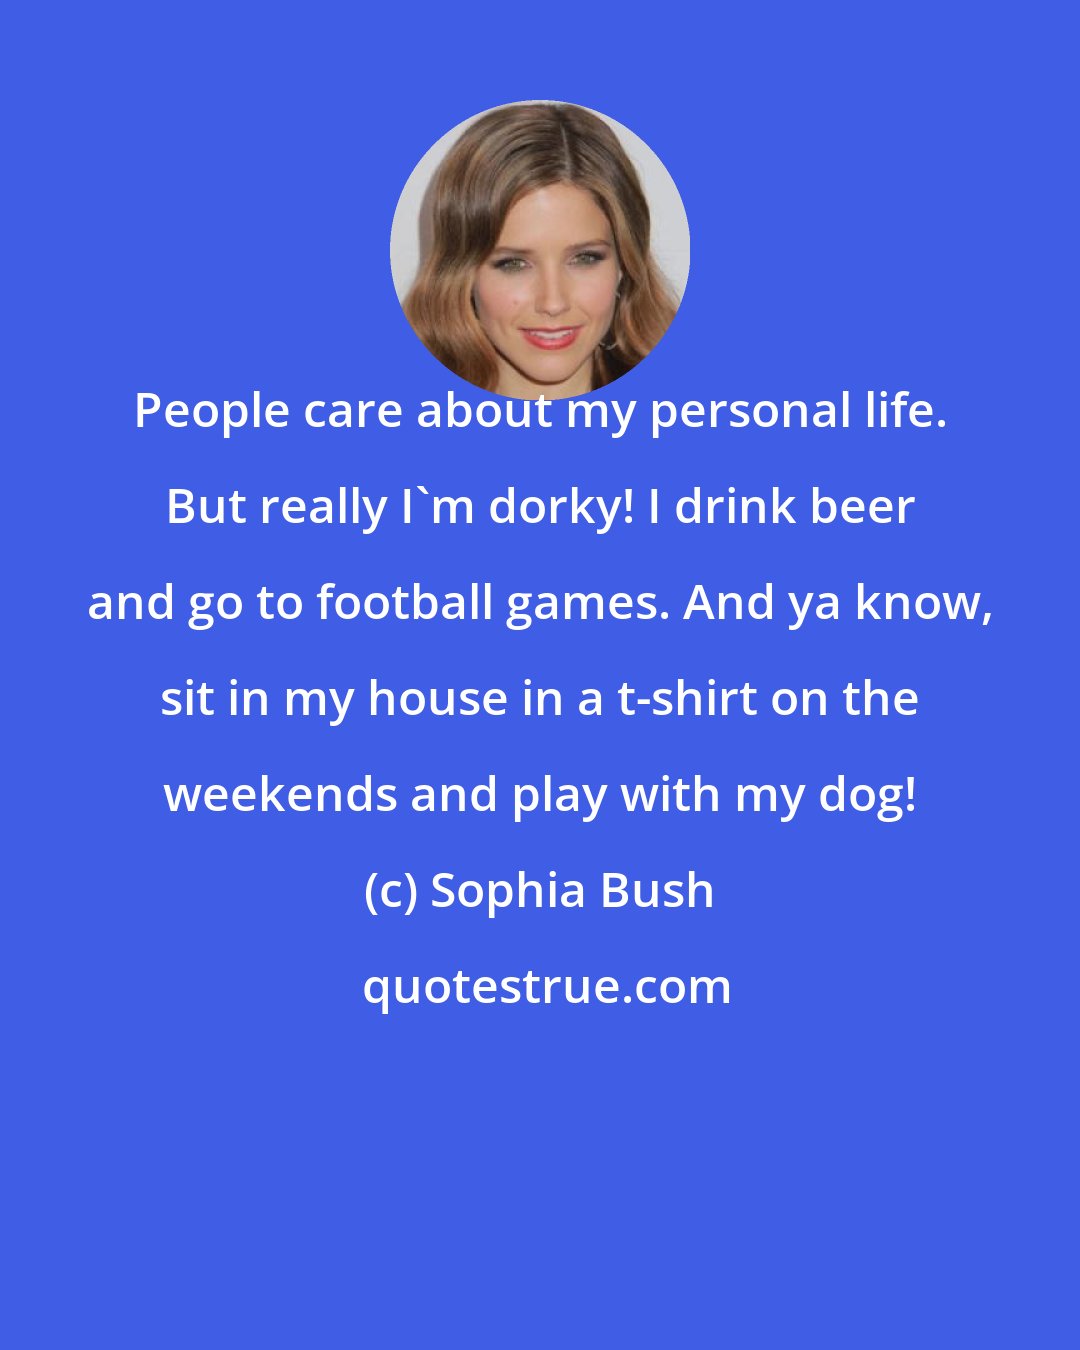 Sophia Bush: People care about my personal life. But really I'm dorky! I drink beer and go to football games. And ya know, sit in my house in a t-shirt on the weekends and play with my dog!